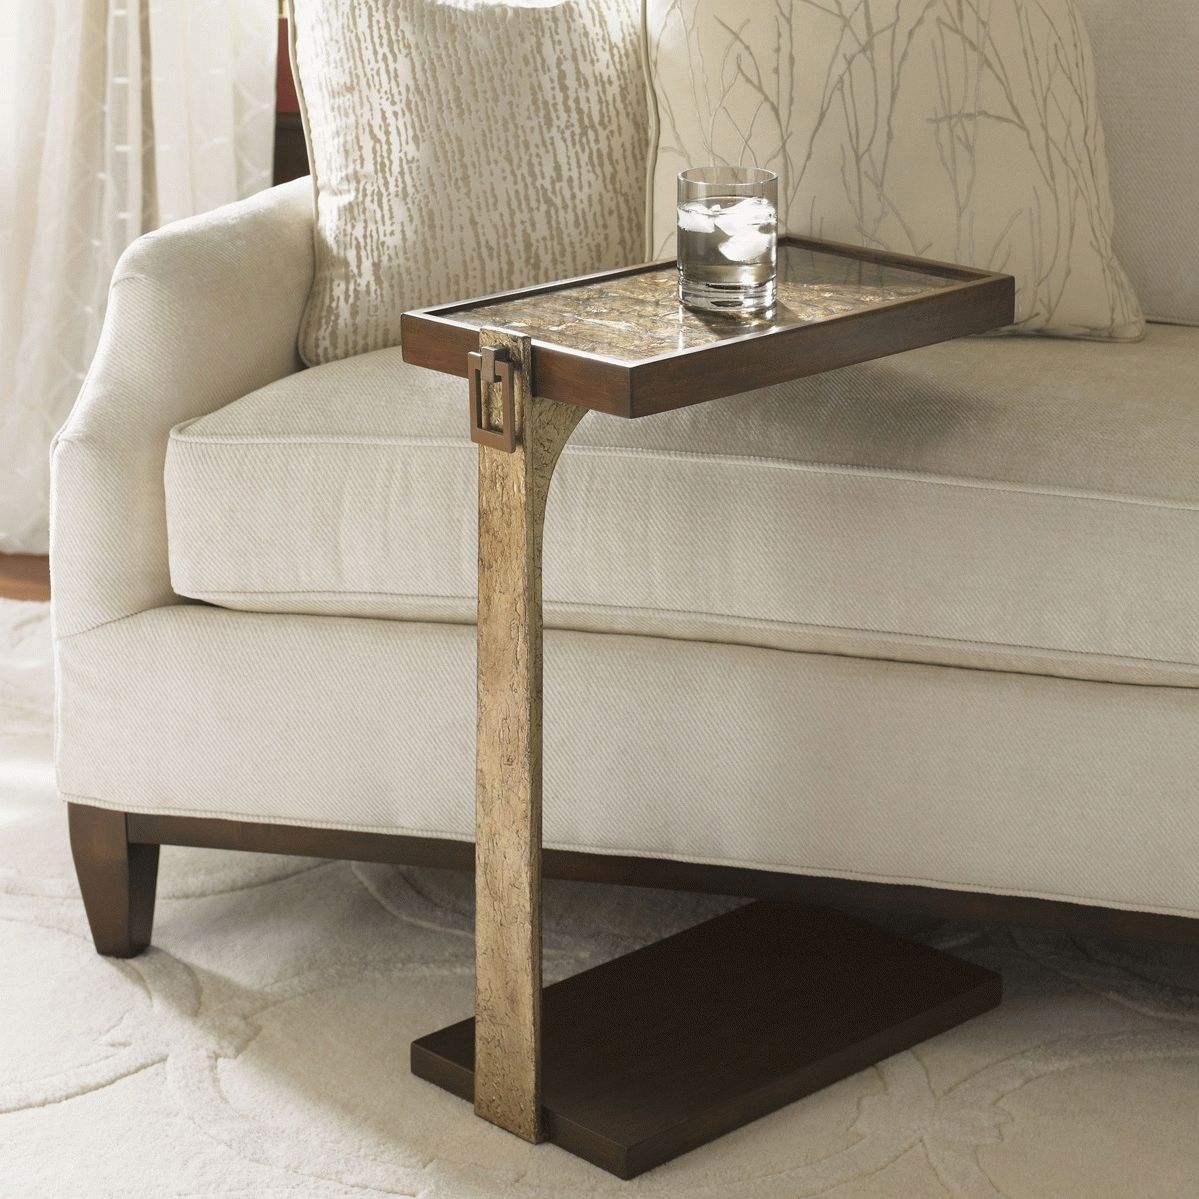 Furniture : Tall Slim End Table Super Small With Drink Holder Drawer With Sofas With Drink Tables (View 3 of 10)